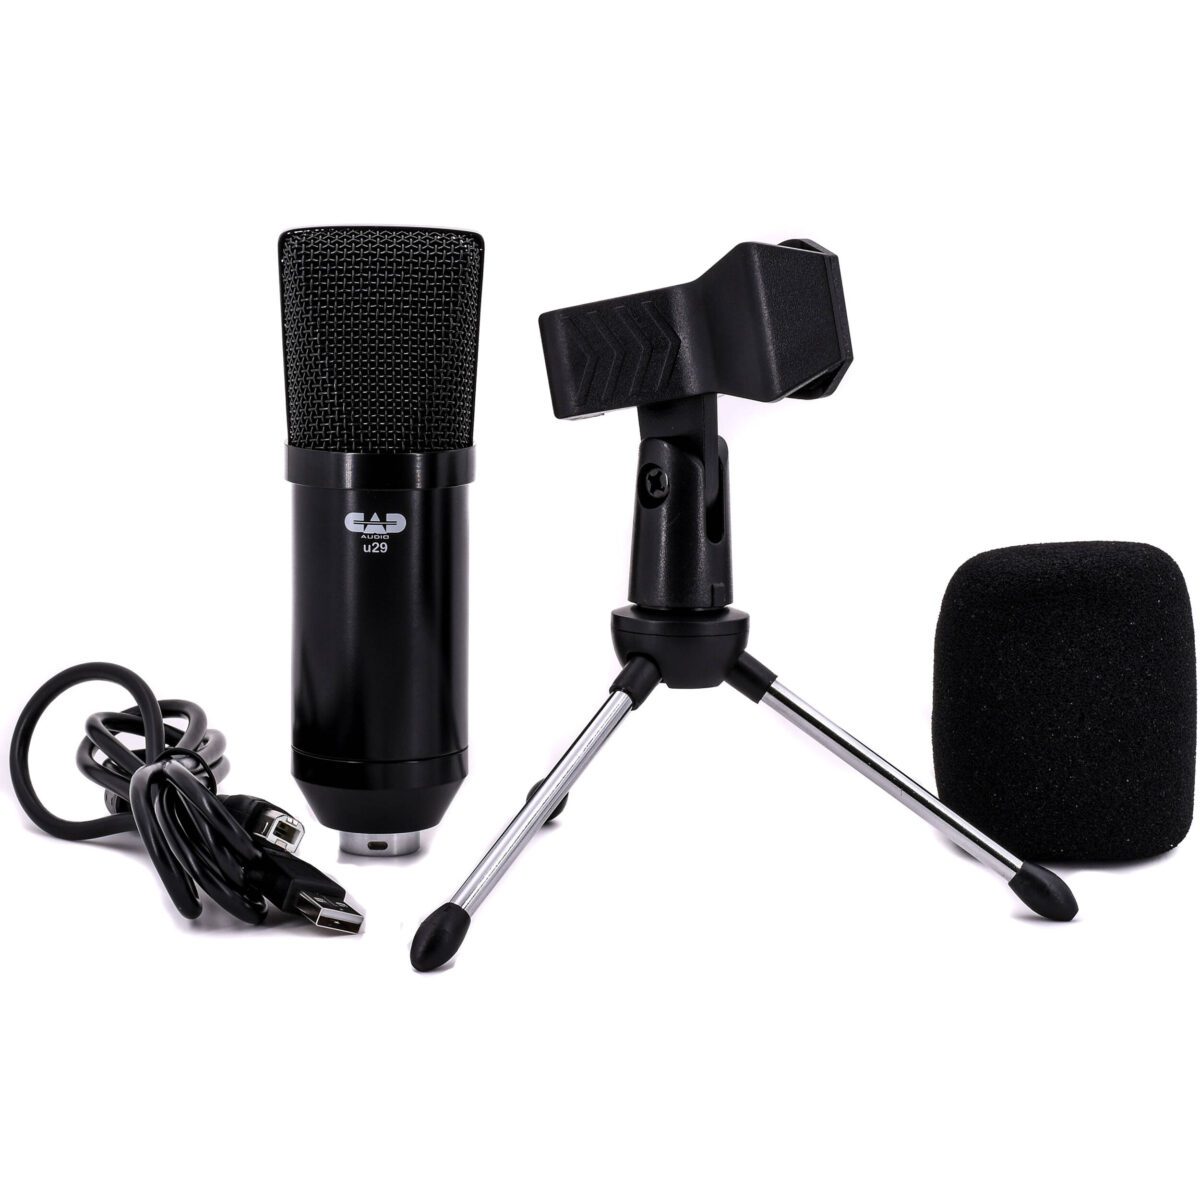 Key Features For Quality, Budget-Conscious Recording Record Straight to Computers over USB Cardioid Polar Pattern Minimizes Room Quality 44.1 kHz/16-Bit Audio Included Tripod Stand & Mounting Clip Included USB Cable & Foam Windscreen